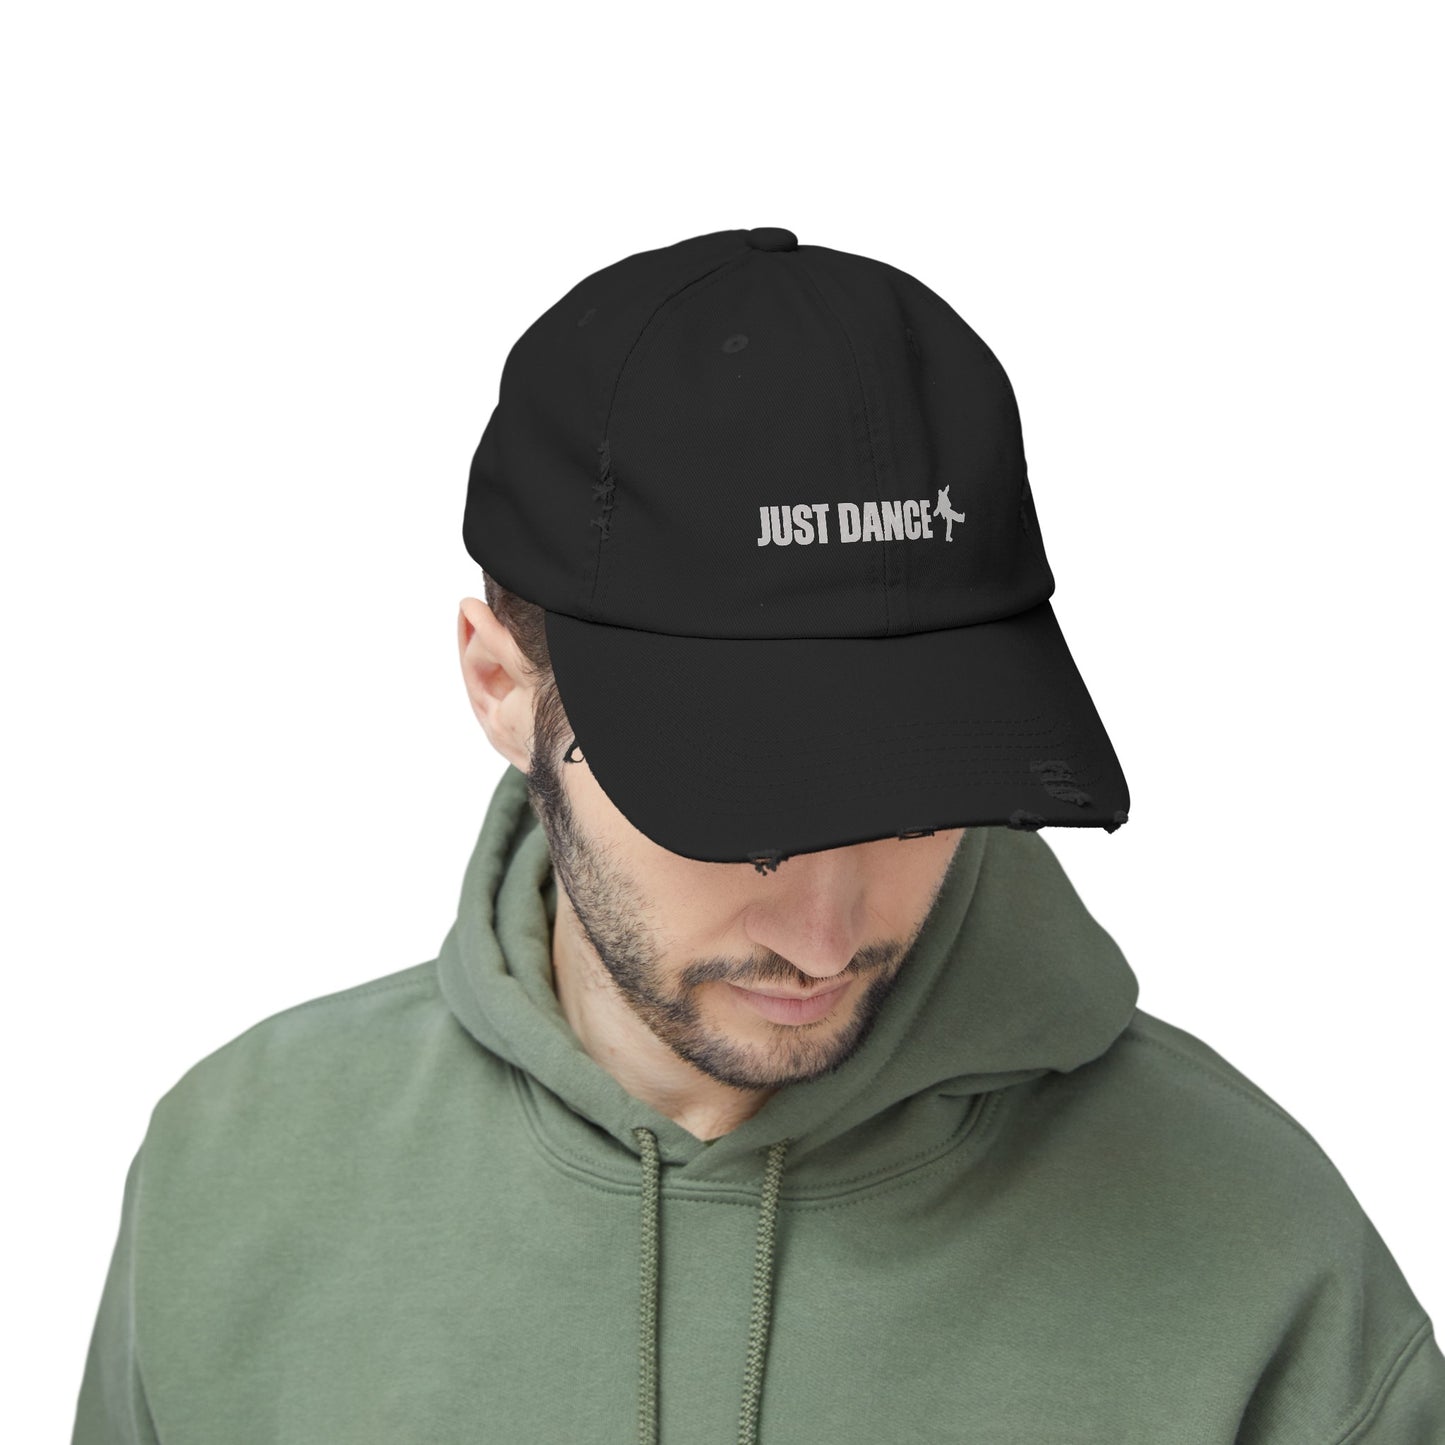 j-hope Inspired Hope On The Street "Just Dance" Unisex Distressed Cap